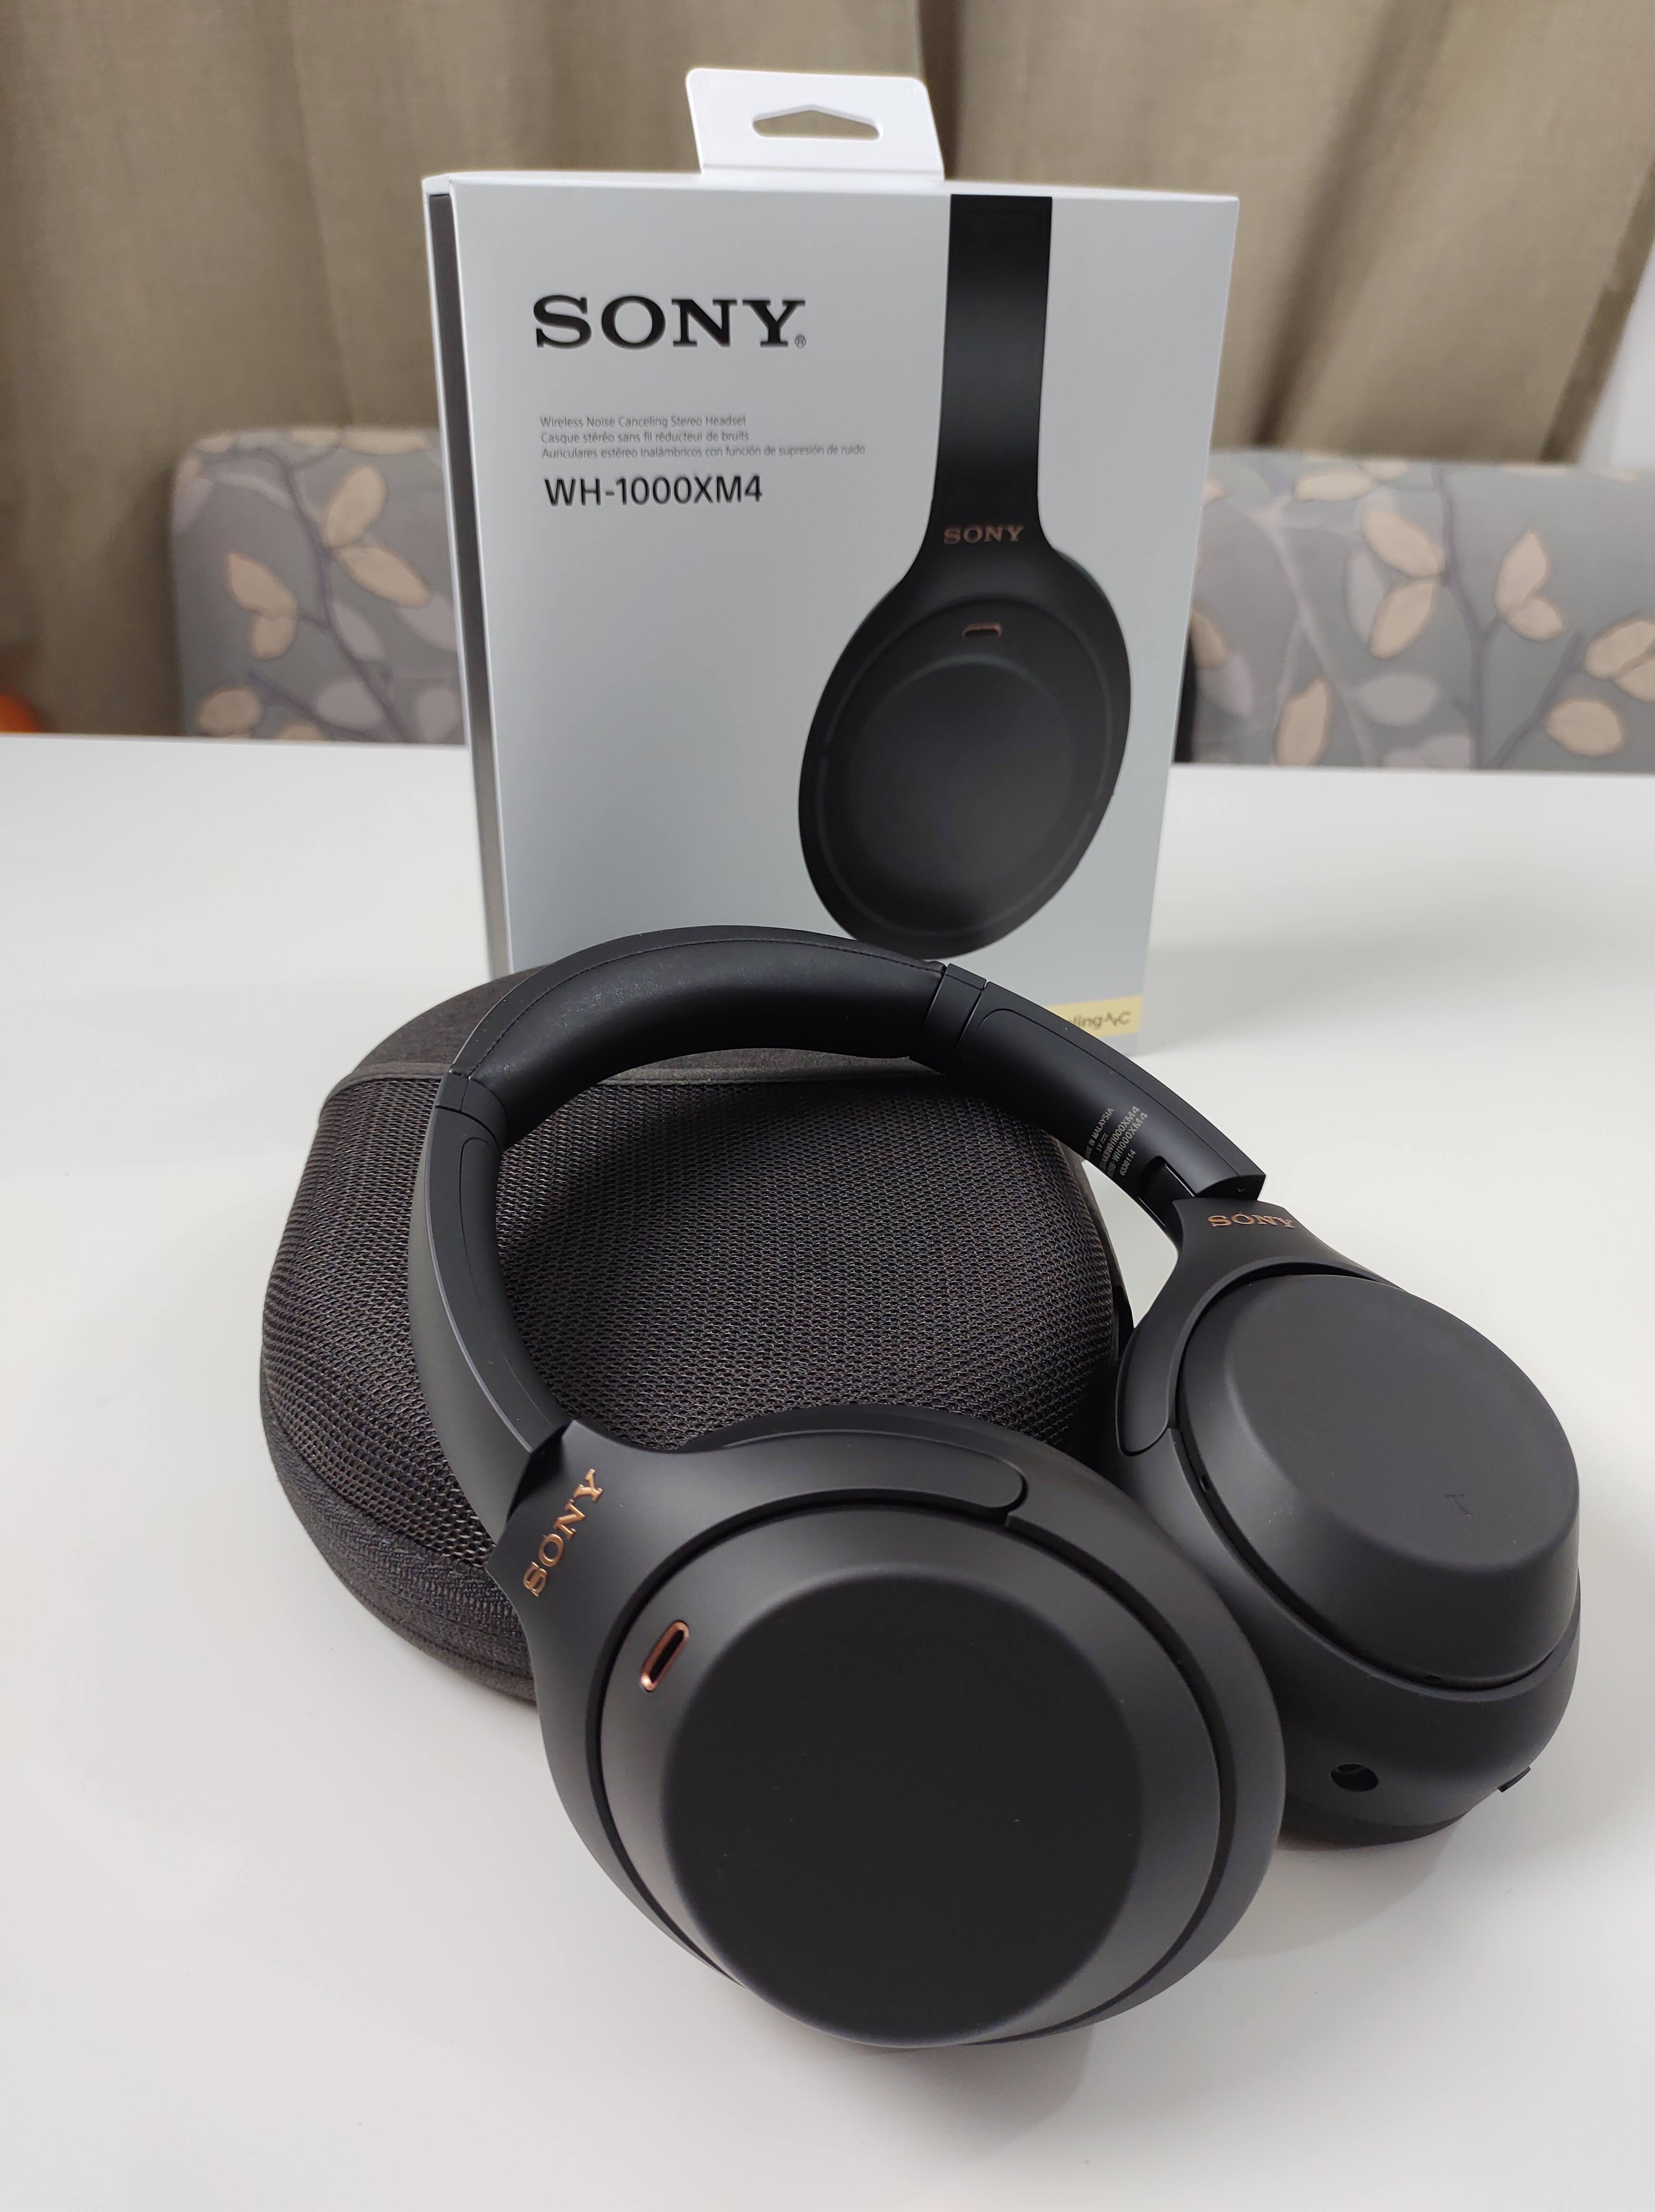 Using the Sony wh-1000xm3 for gaming? Audio - Linus Tech Tips